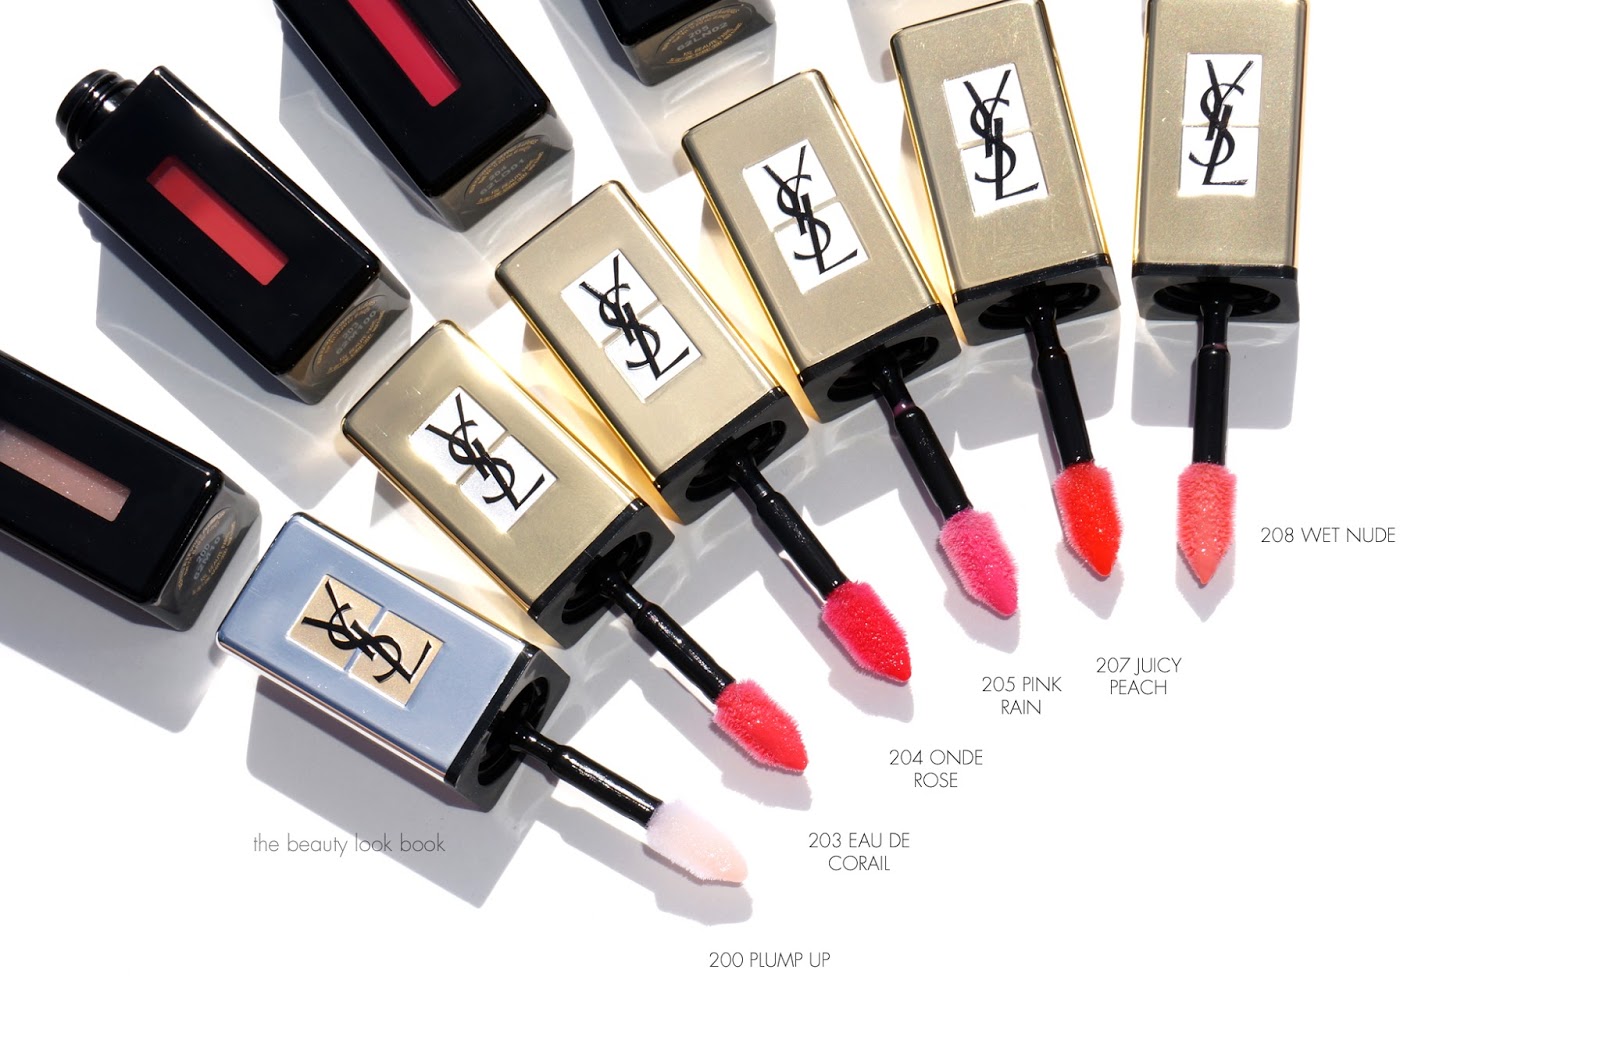 Saint Laurent Collection: New Glossy Stains and Nail Lacquers - The Beauty Look Book